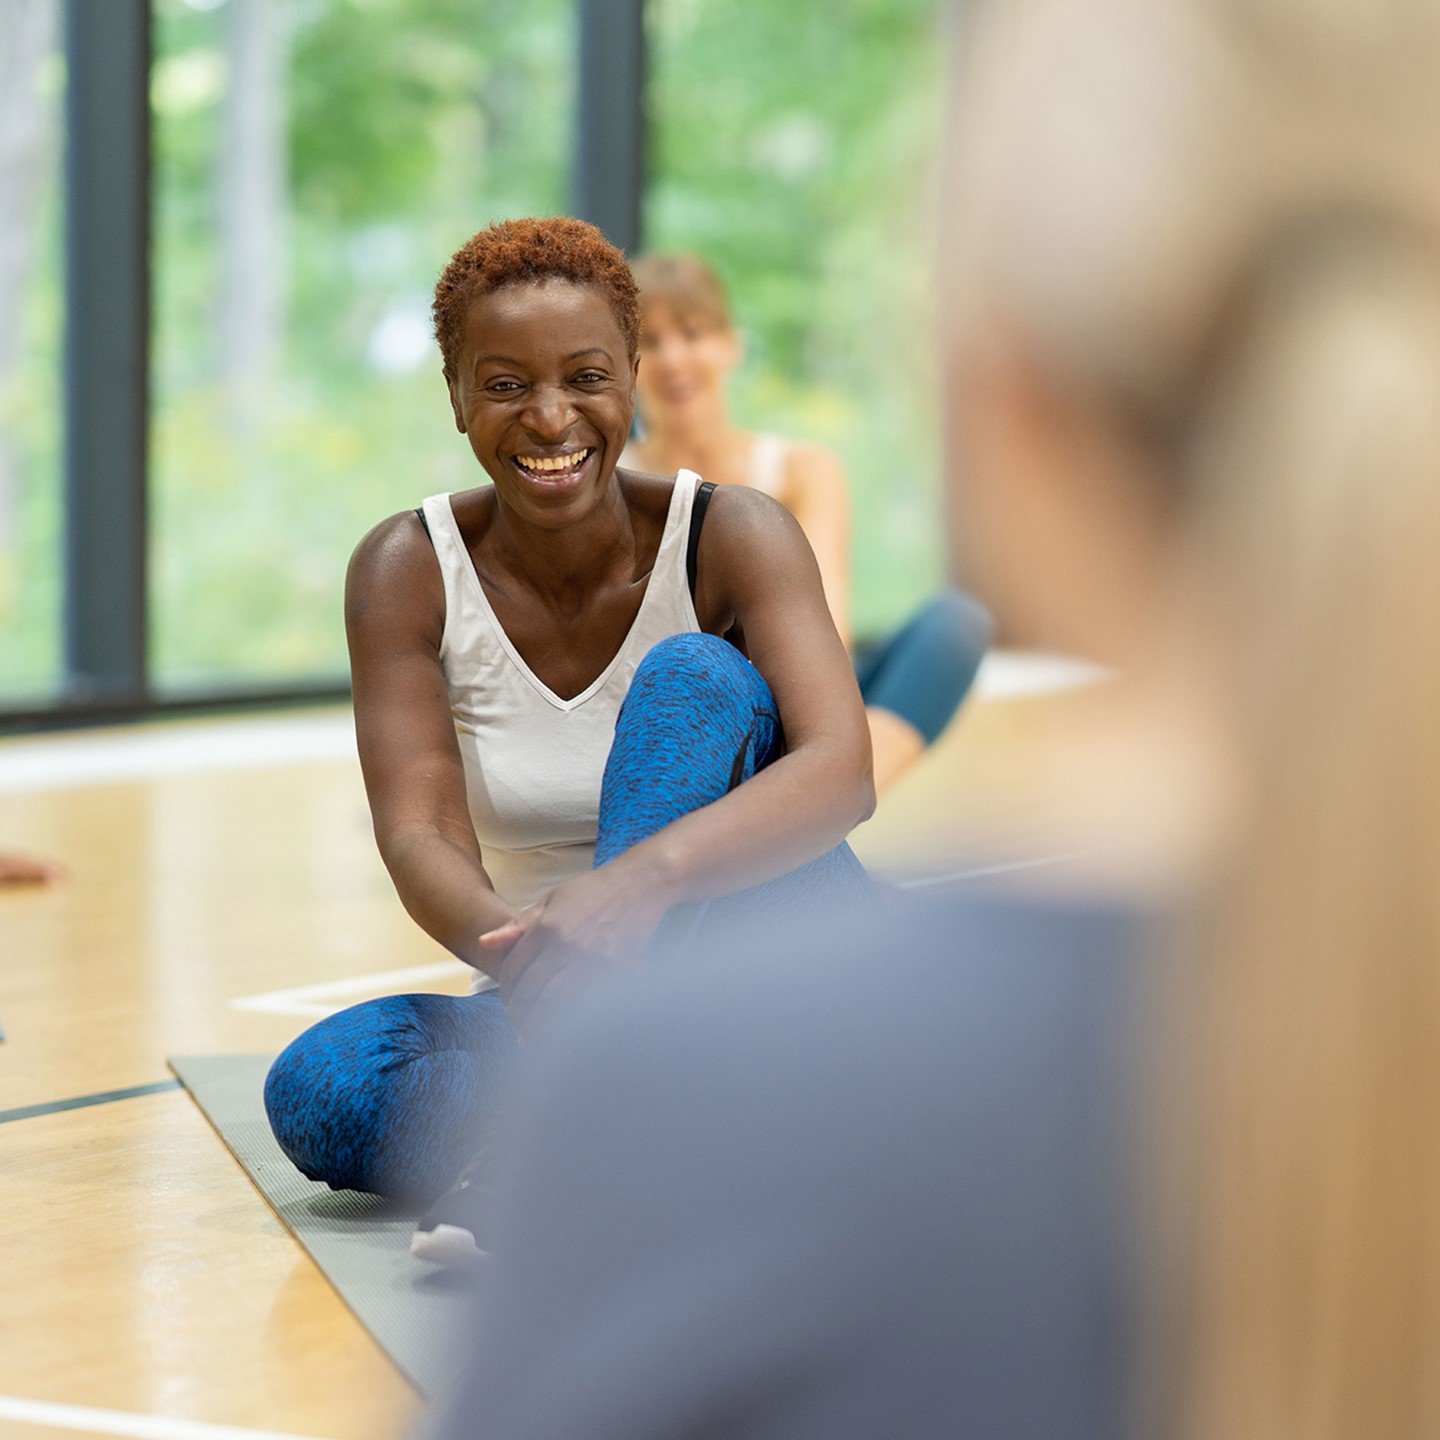 Woman doing yoga on floor mat in group class